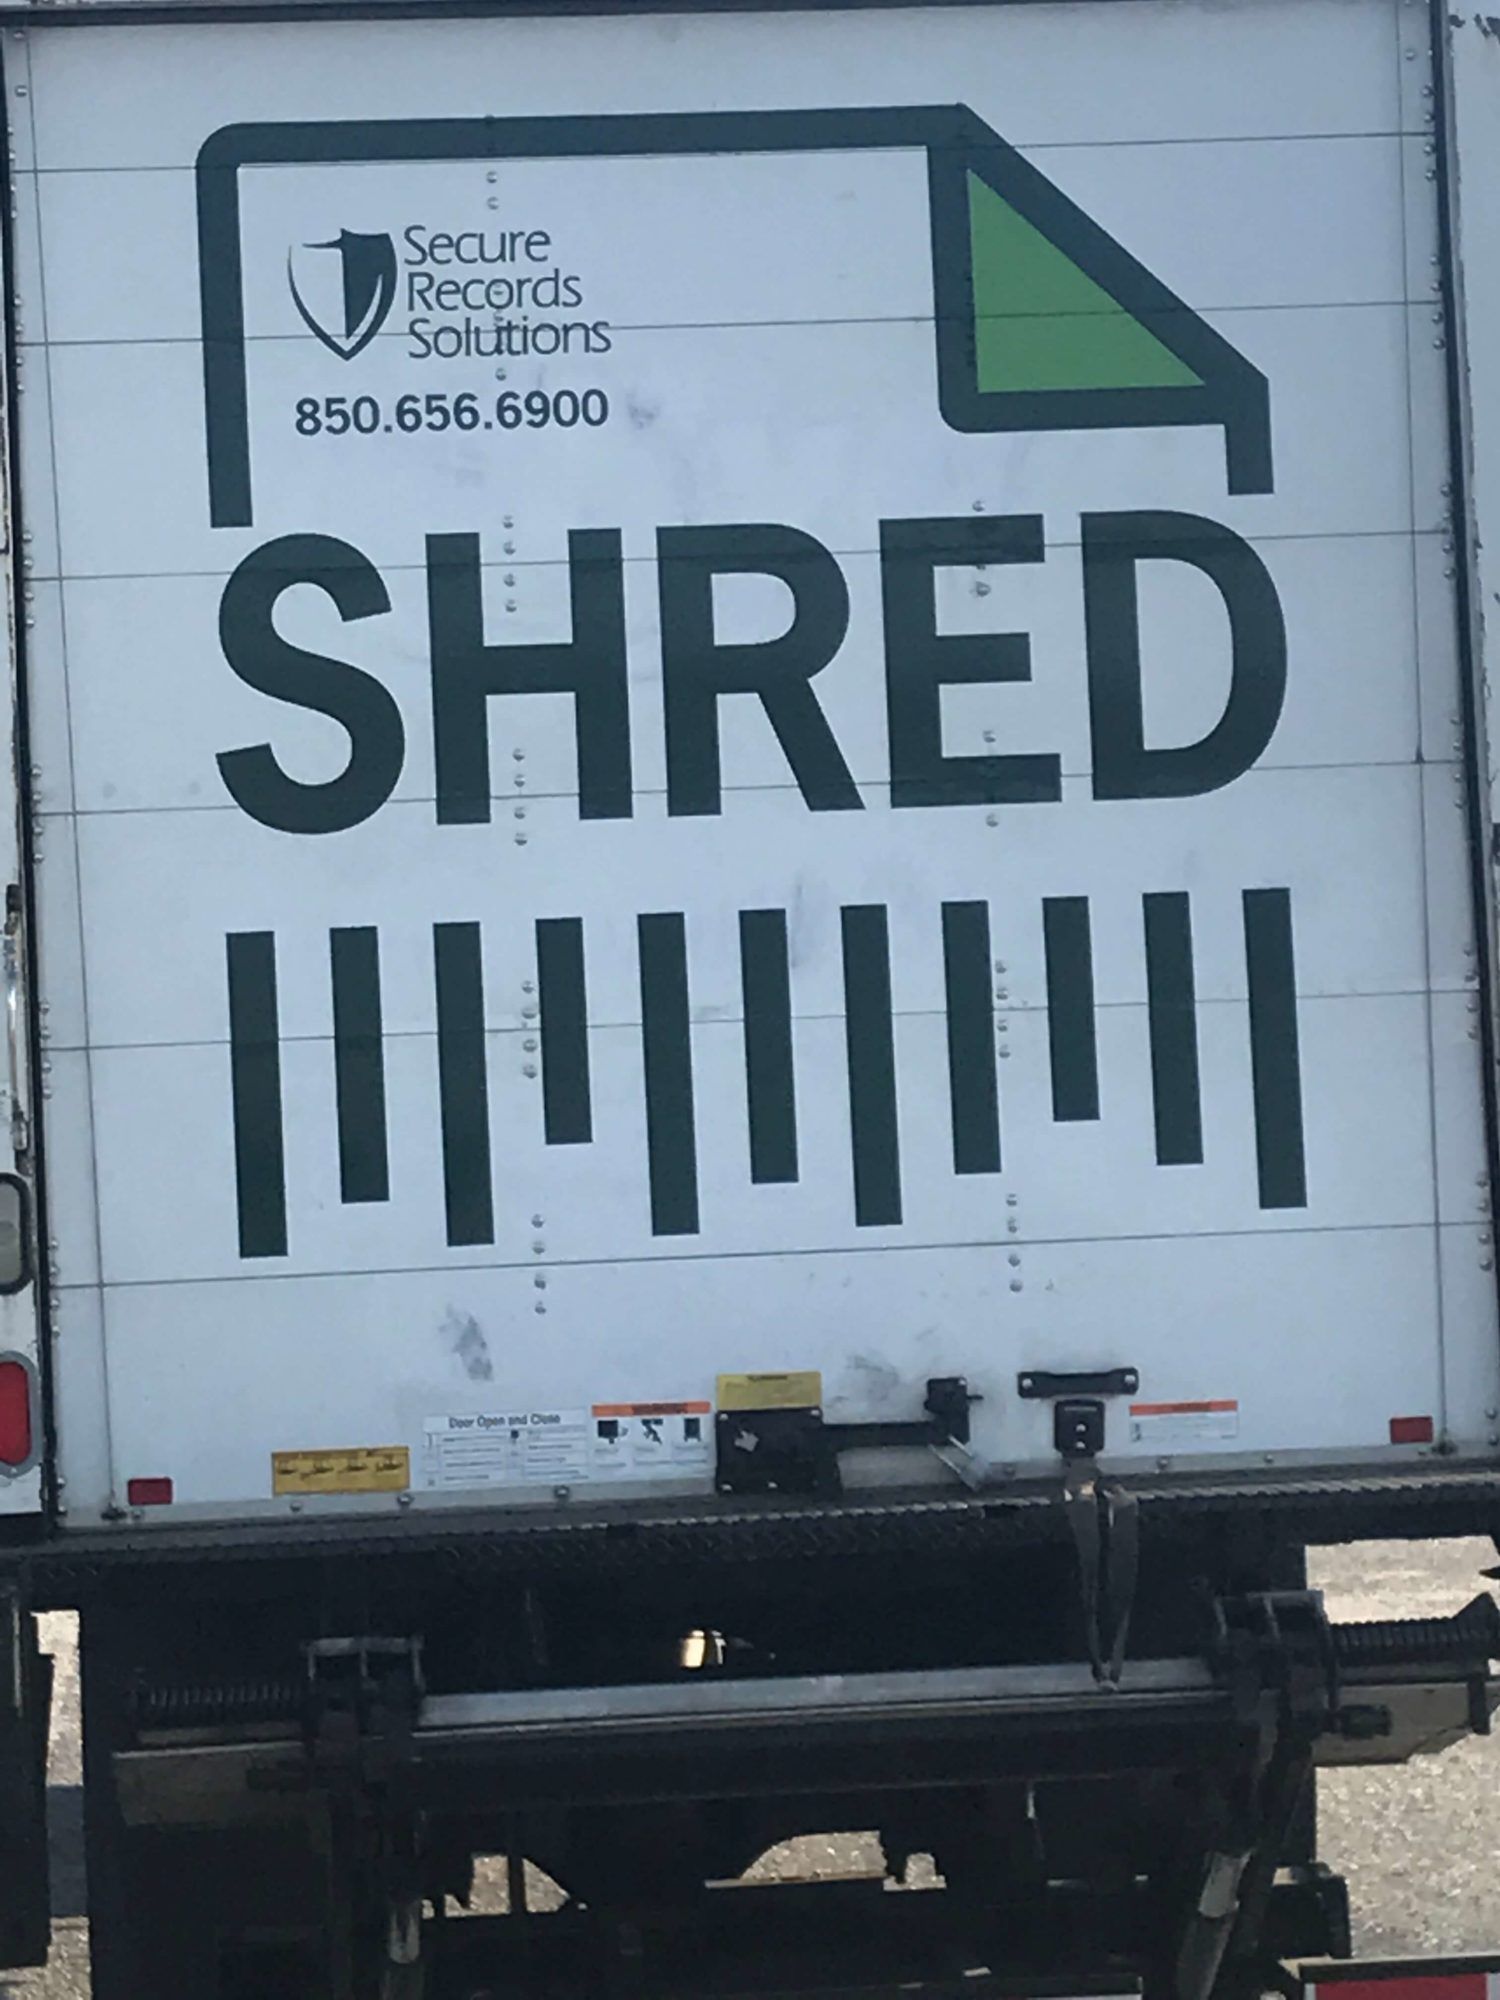 free shred events near me in northern va